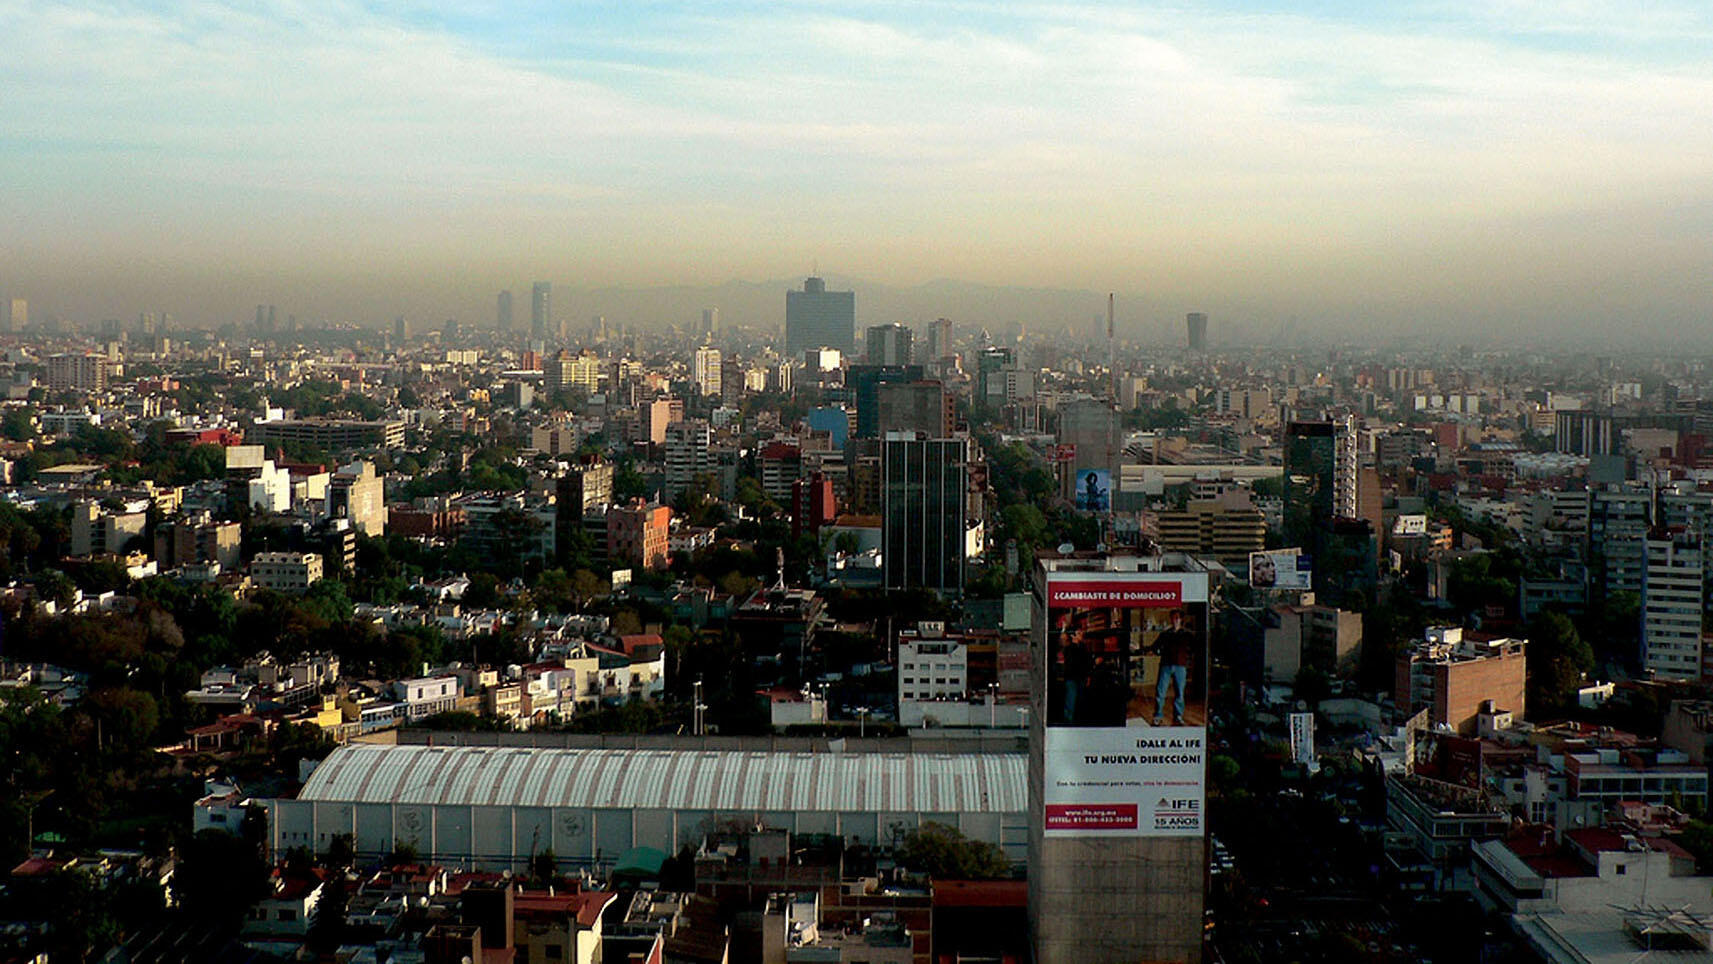 Mexico City's skyline under a layer of brownish smog. (Photo by Ilai A. Magun.)